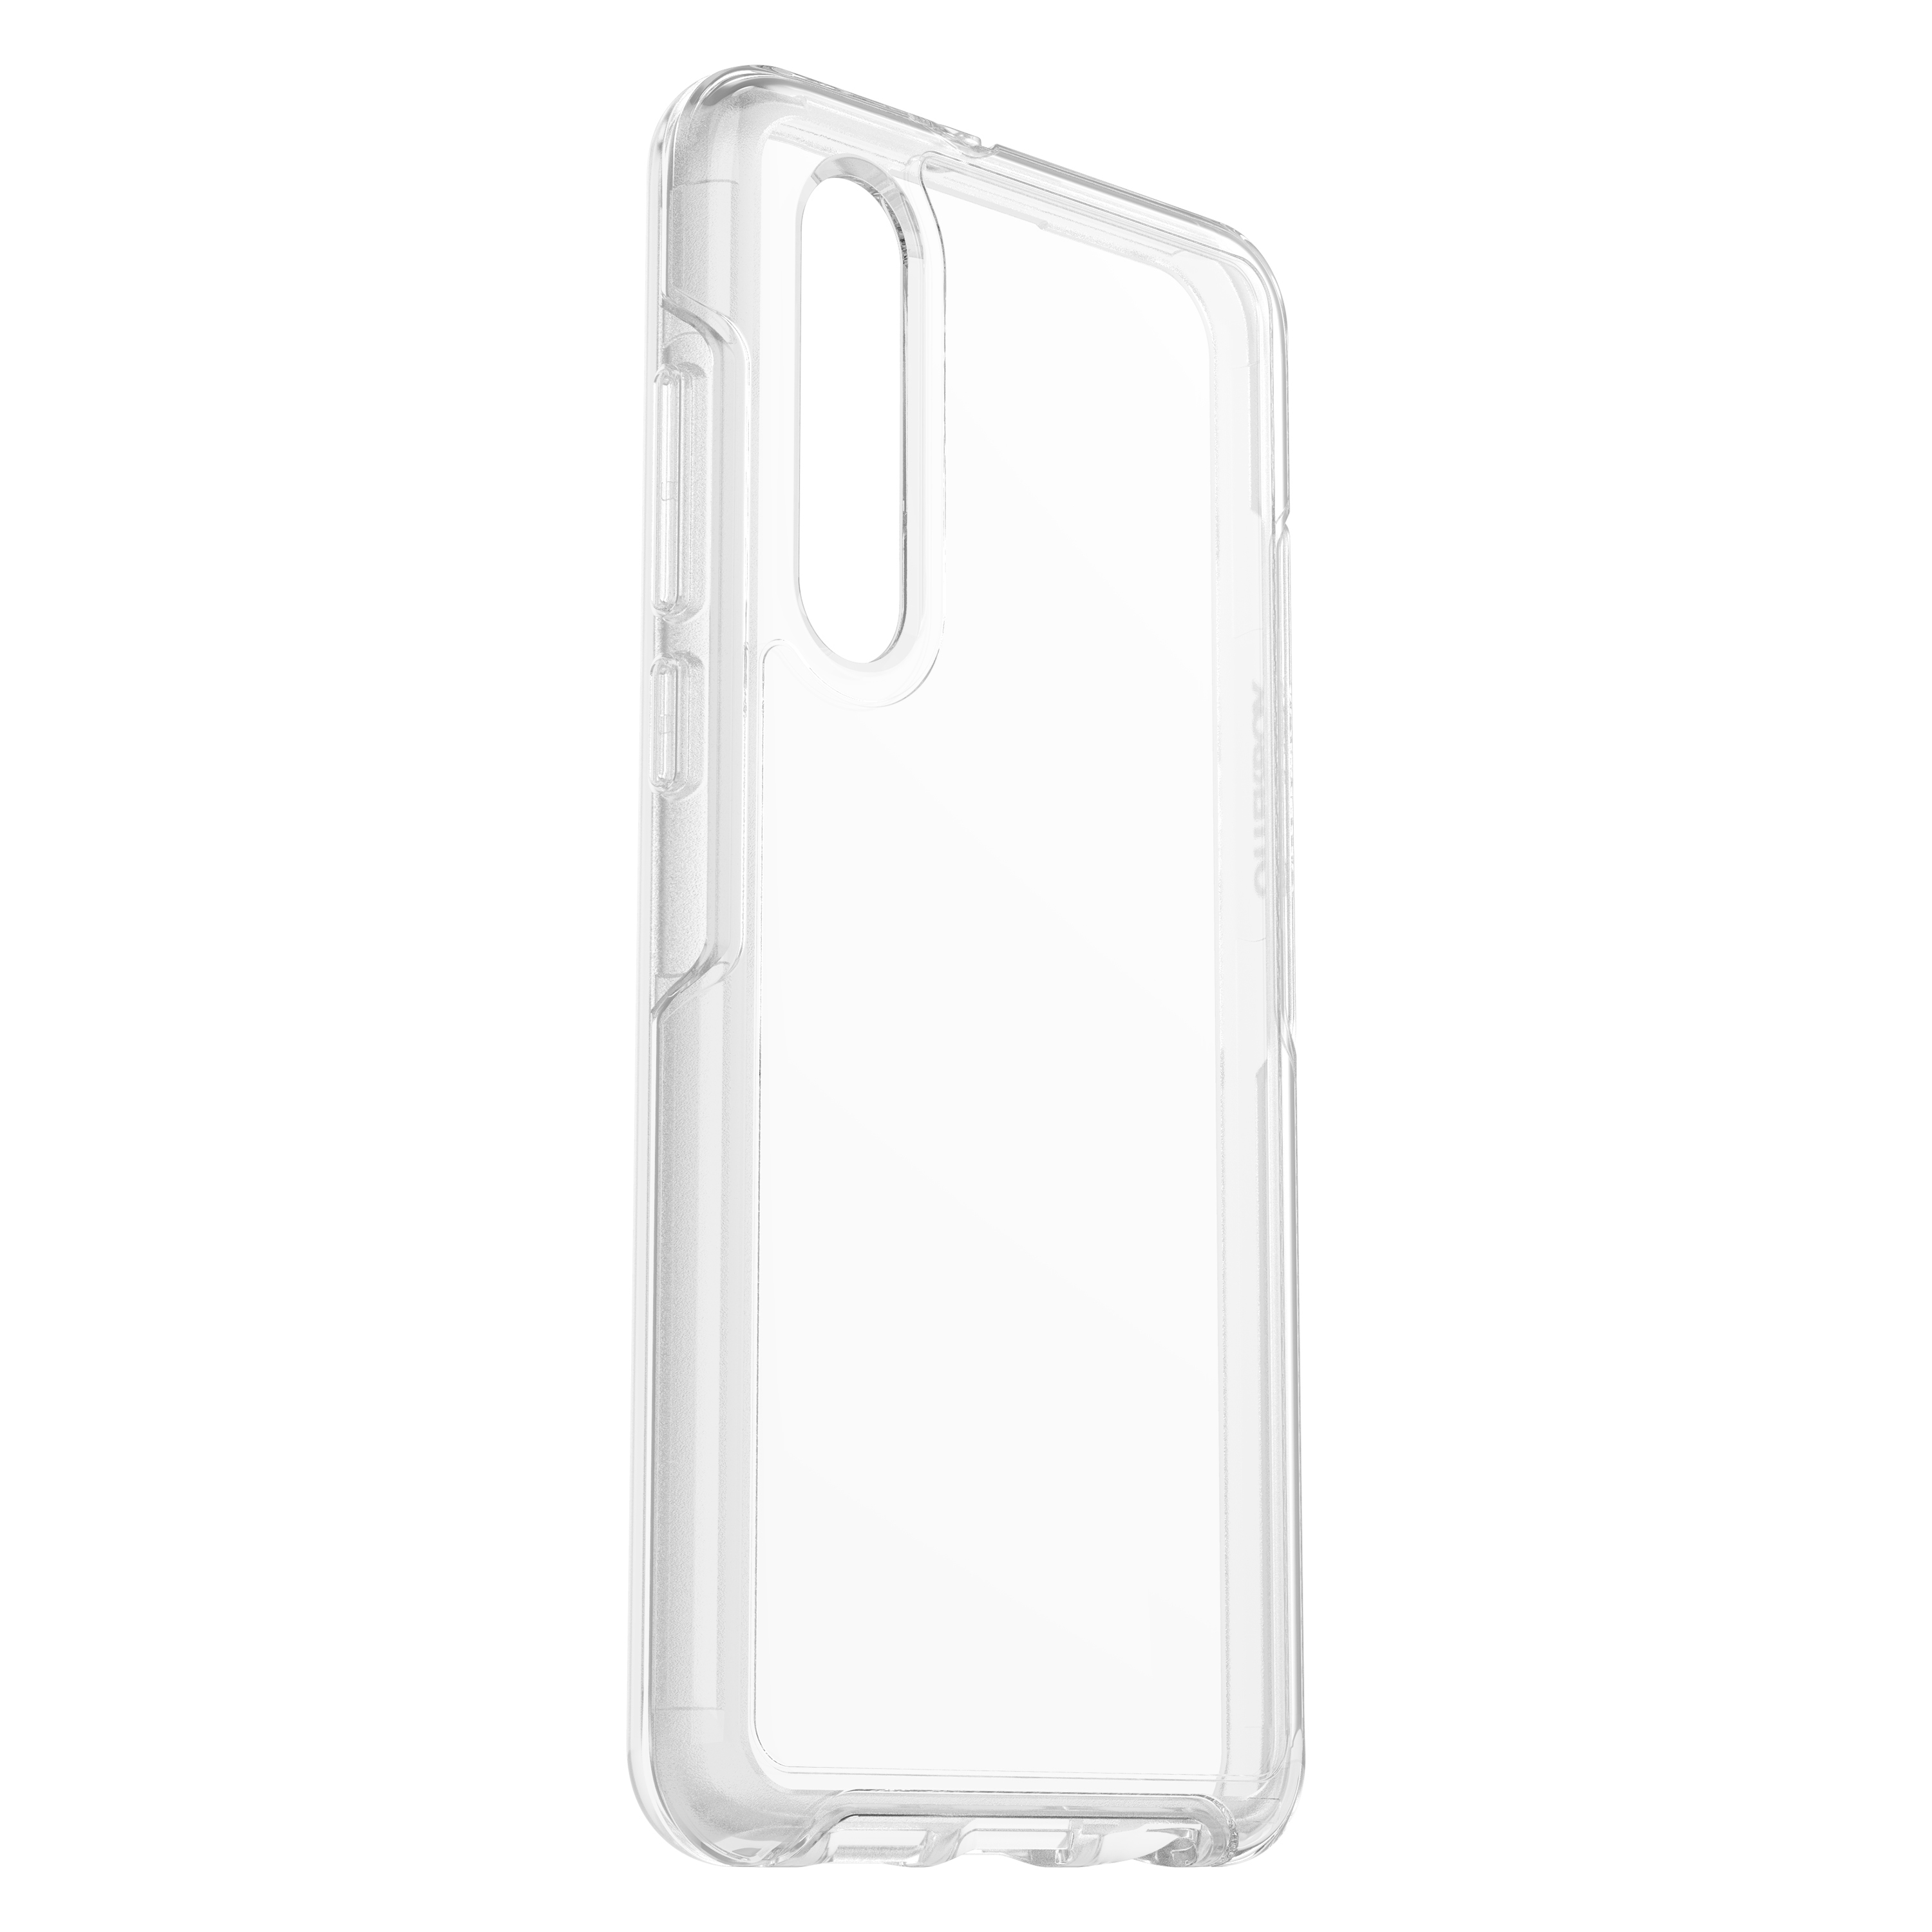 OTTERBOX Symmetry, P30, Backcover, Transparent Huawei